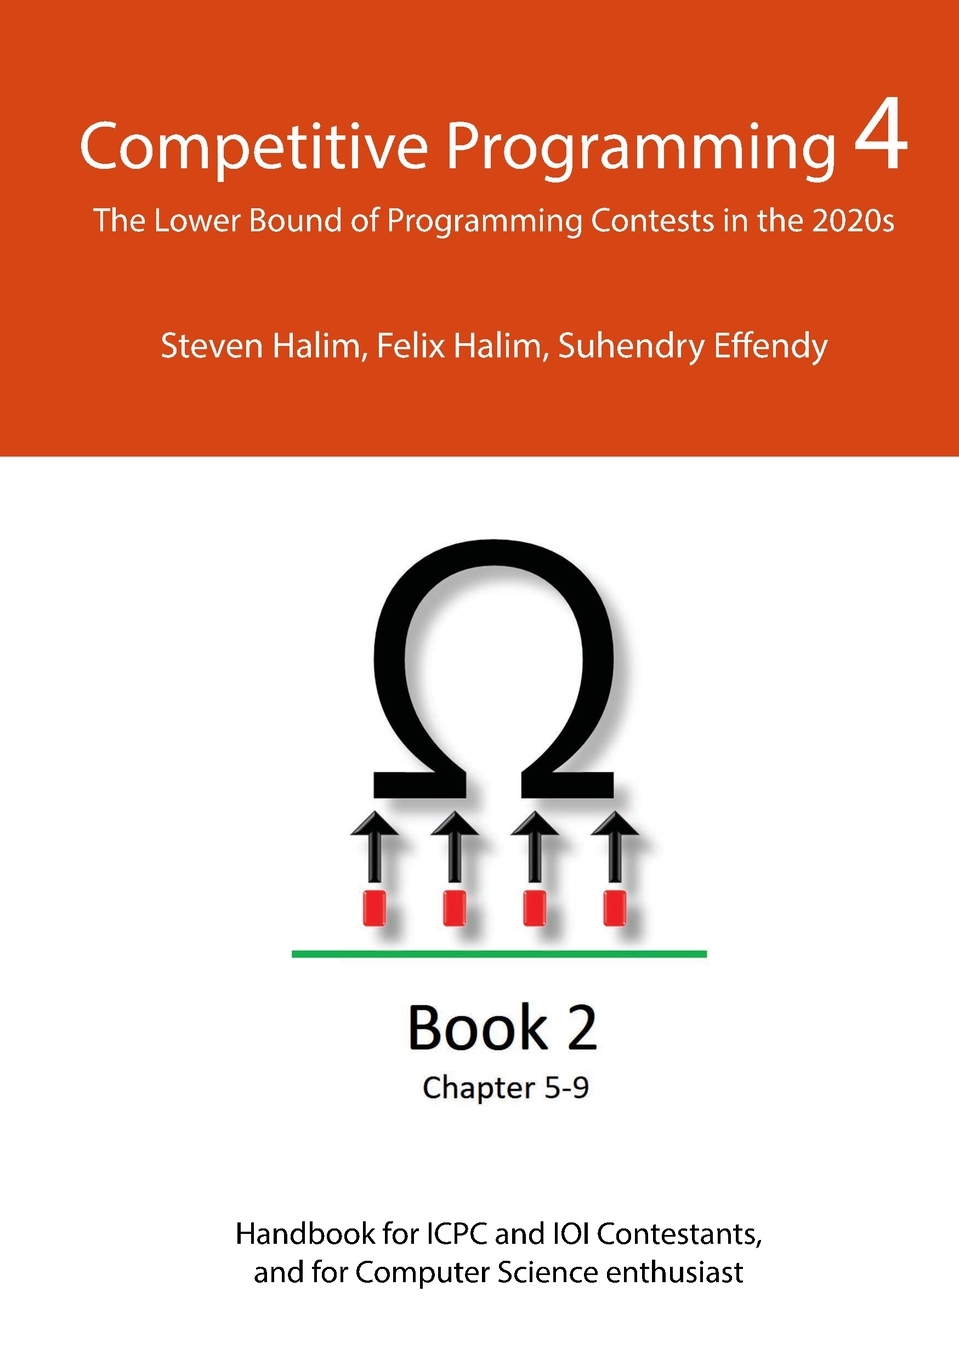 Competition book. Competitive Programmer's Handbook. Competitive Programming. Programming books. Competitive Programmer’s Handbook Antti Laaksonen.